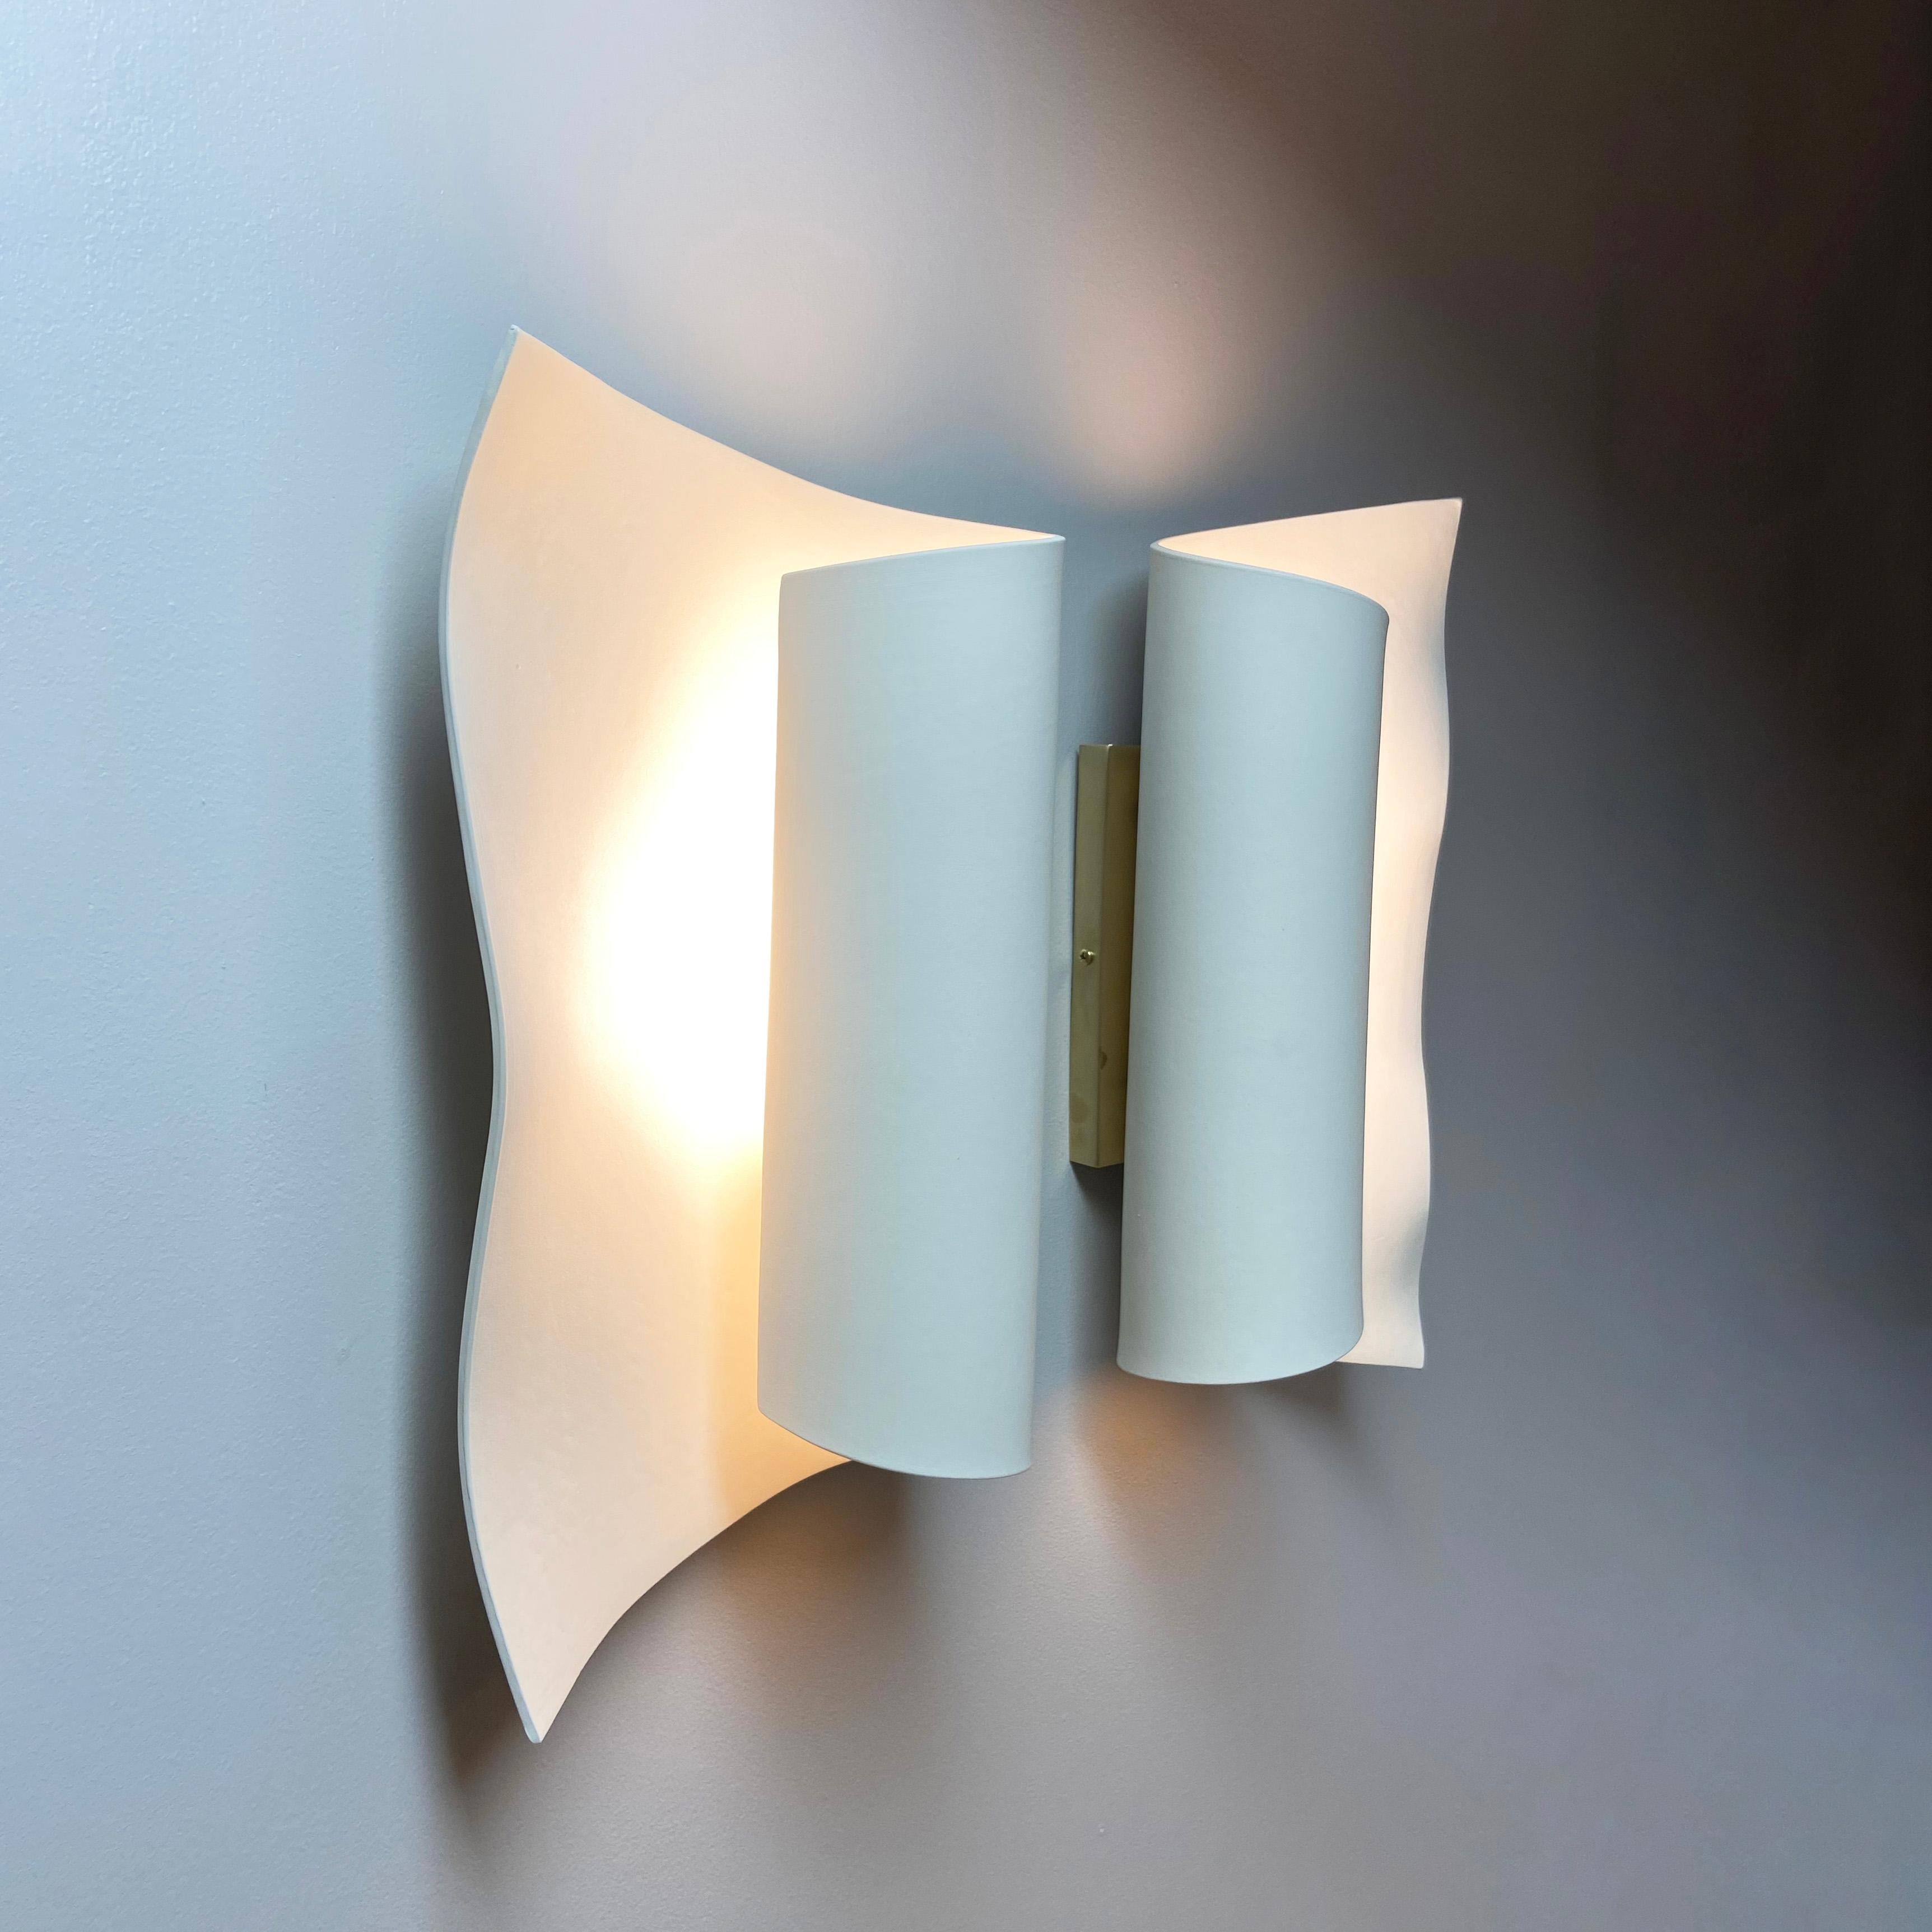 Scroll Glazed Ceramic Wall Sconce Luminaire Pair In New Condition For Sale In Tarrytown, NY